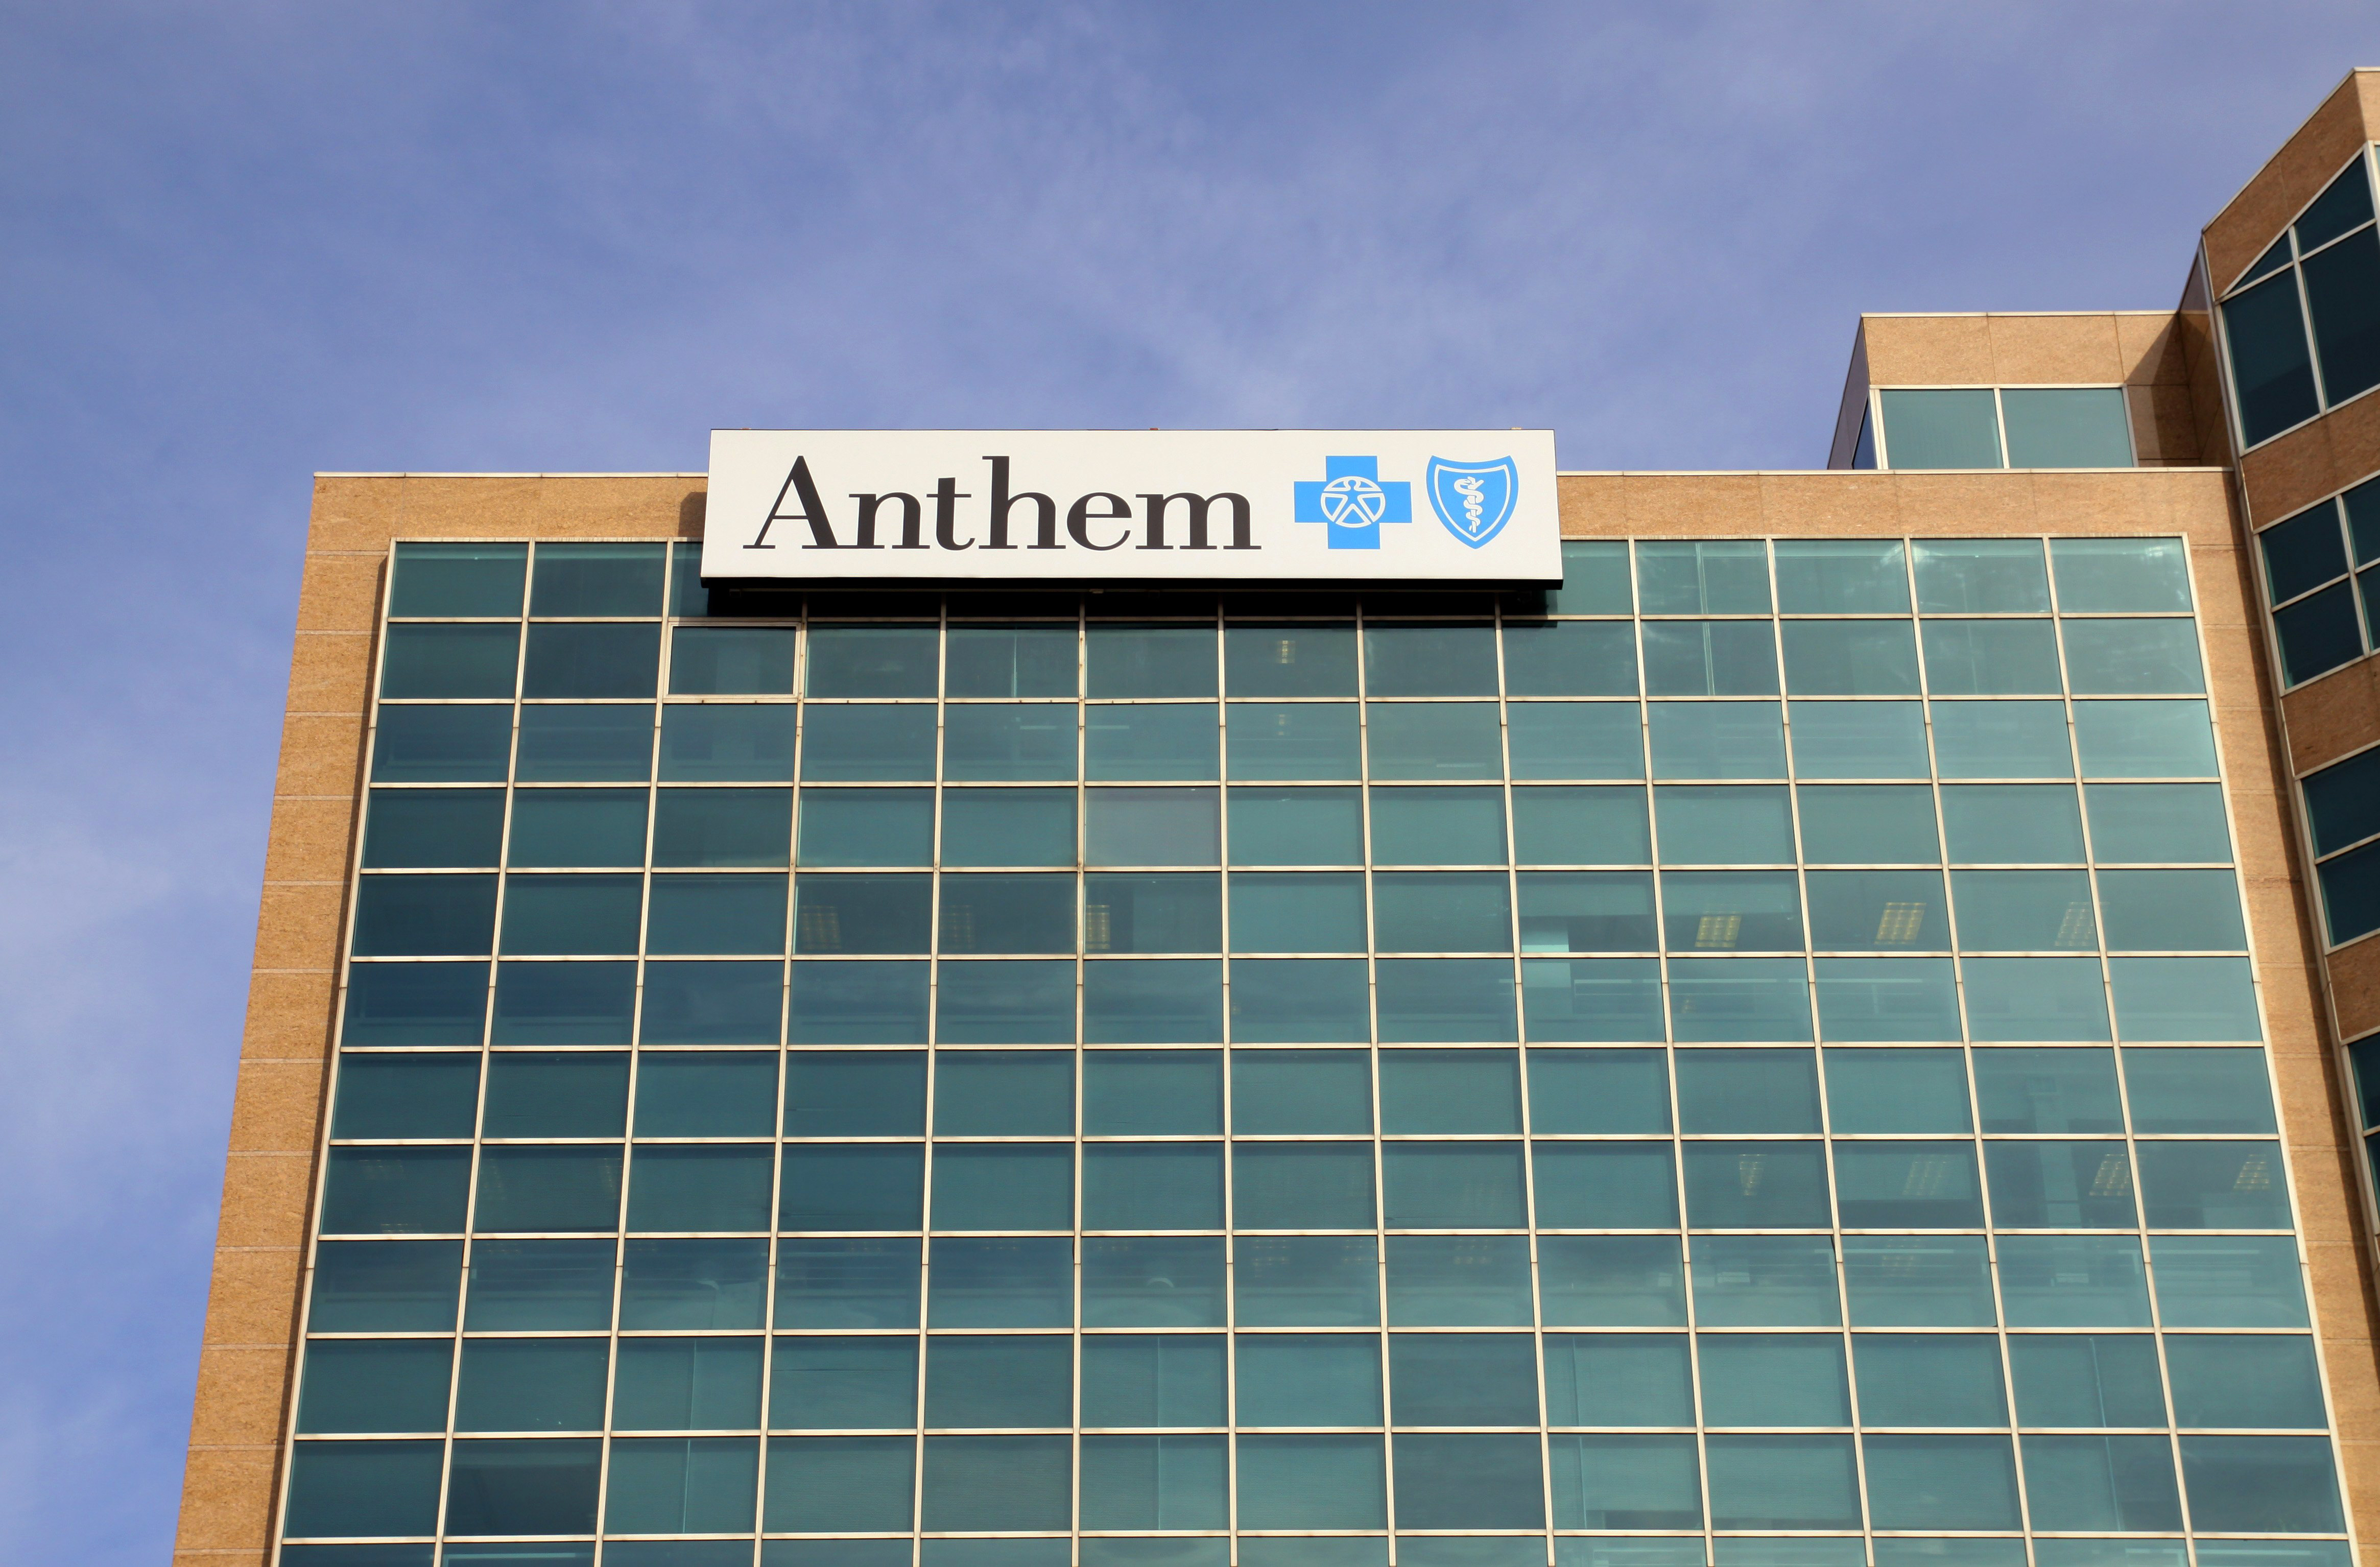 Anthem Blue Cross and Blue Shield building, in St. Louis, Missouri.